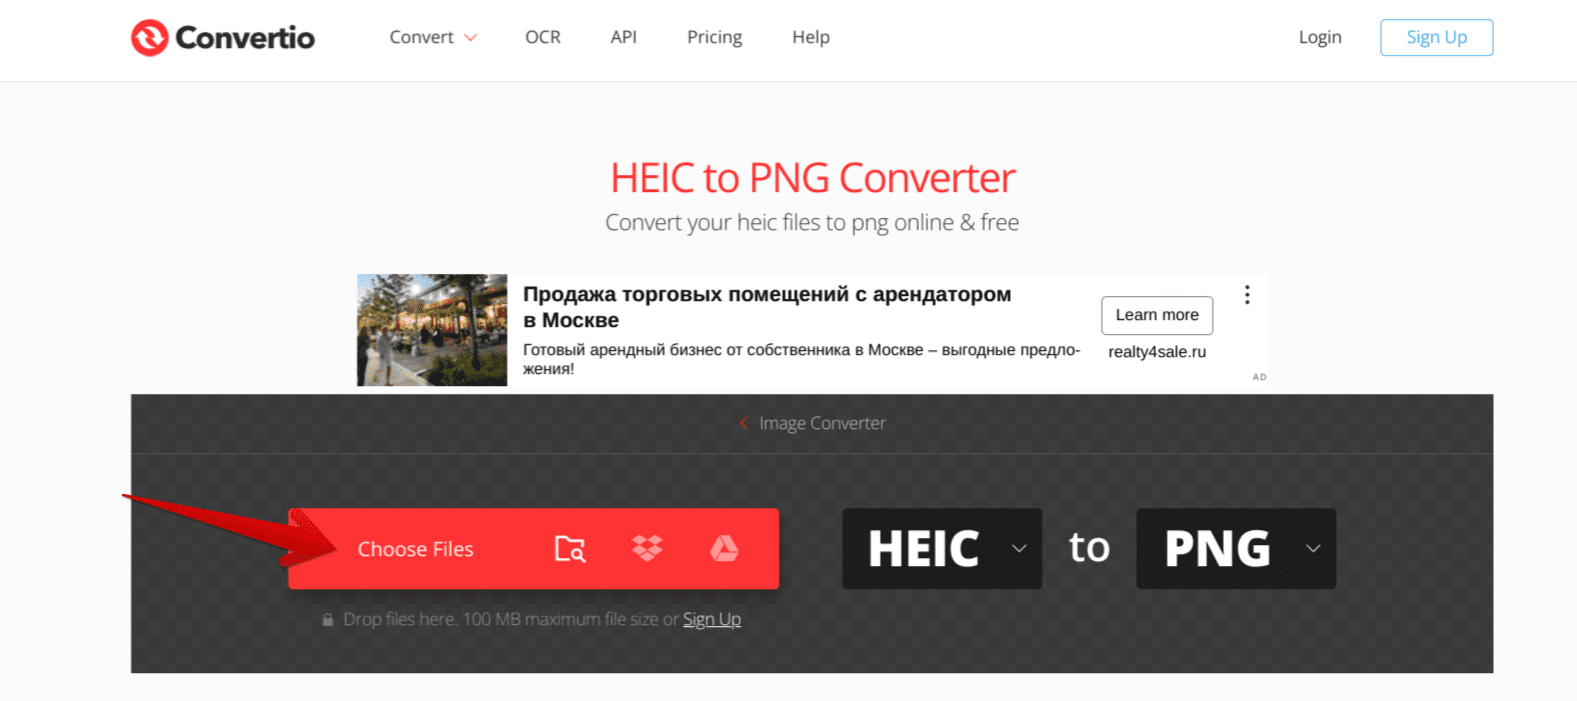 Converting HEIC files with Convertio